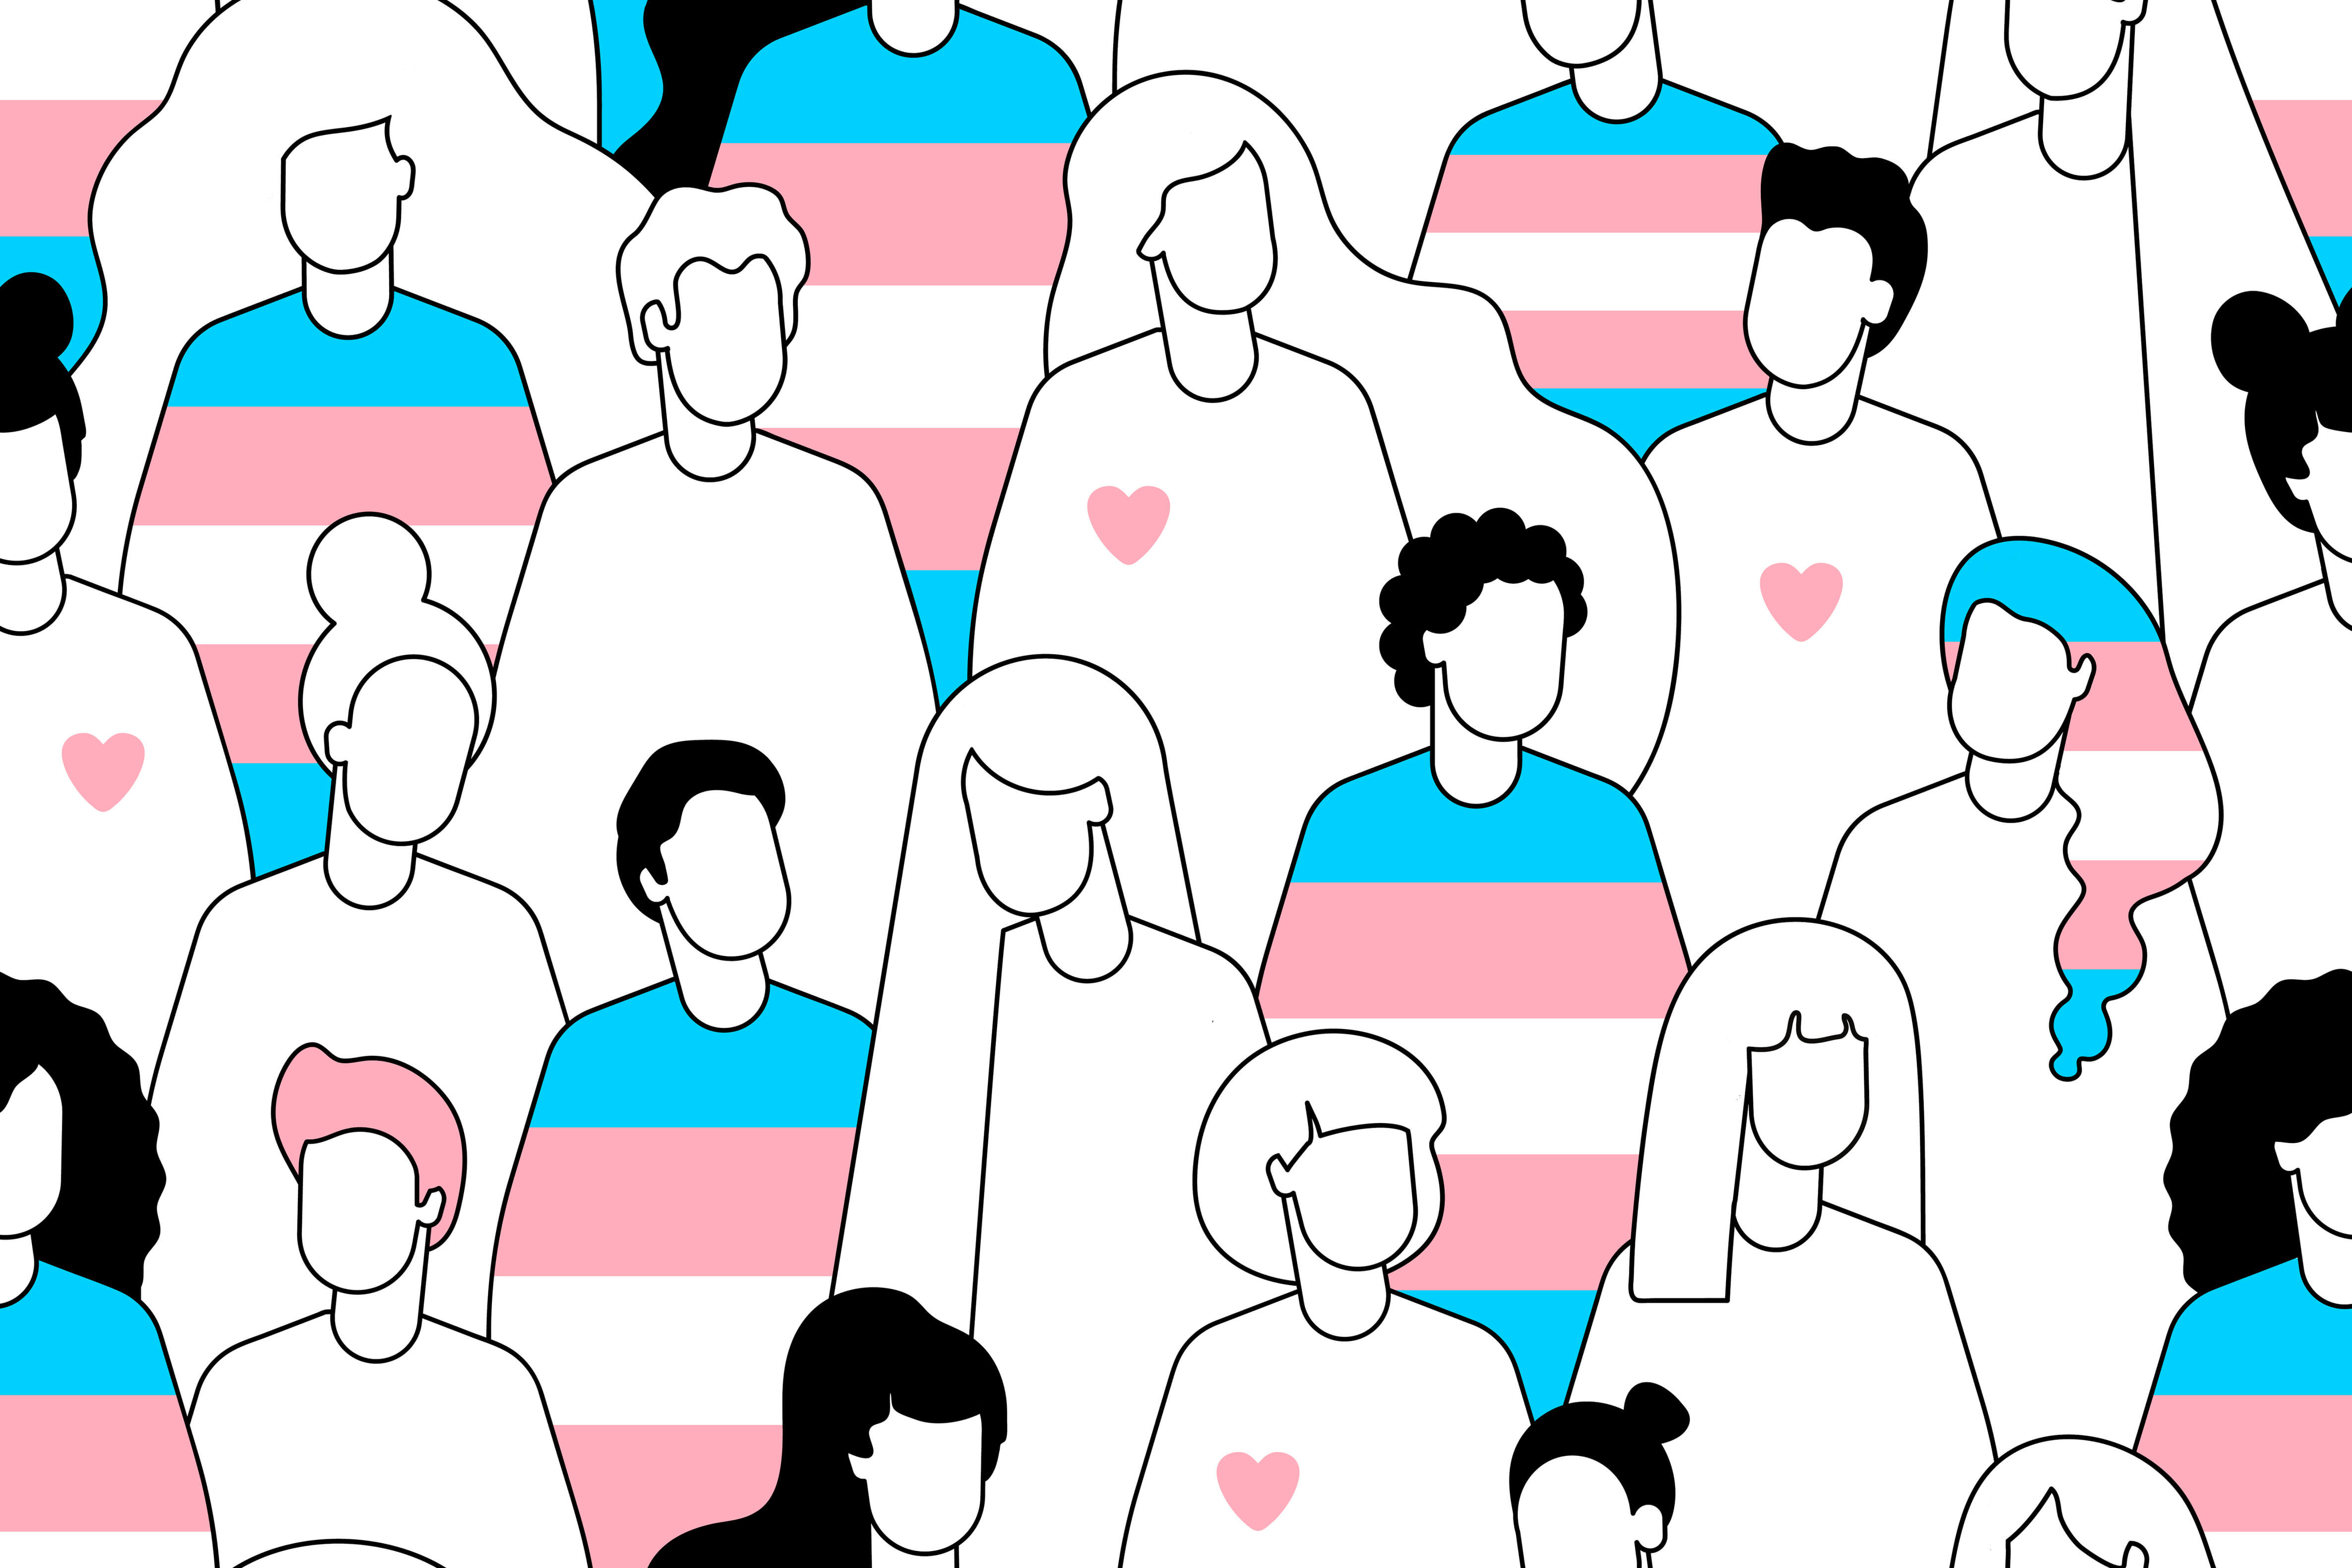 A stylized cartoon of a group of diverse people, some with pink hearts on their shirts, others with the striped transgender flag design on their shirts.